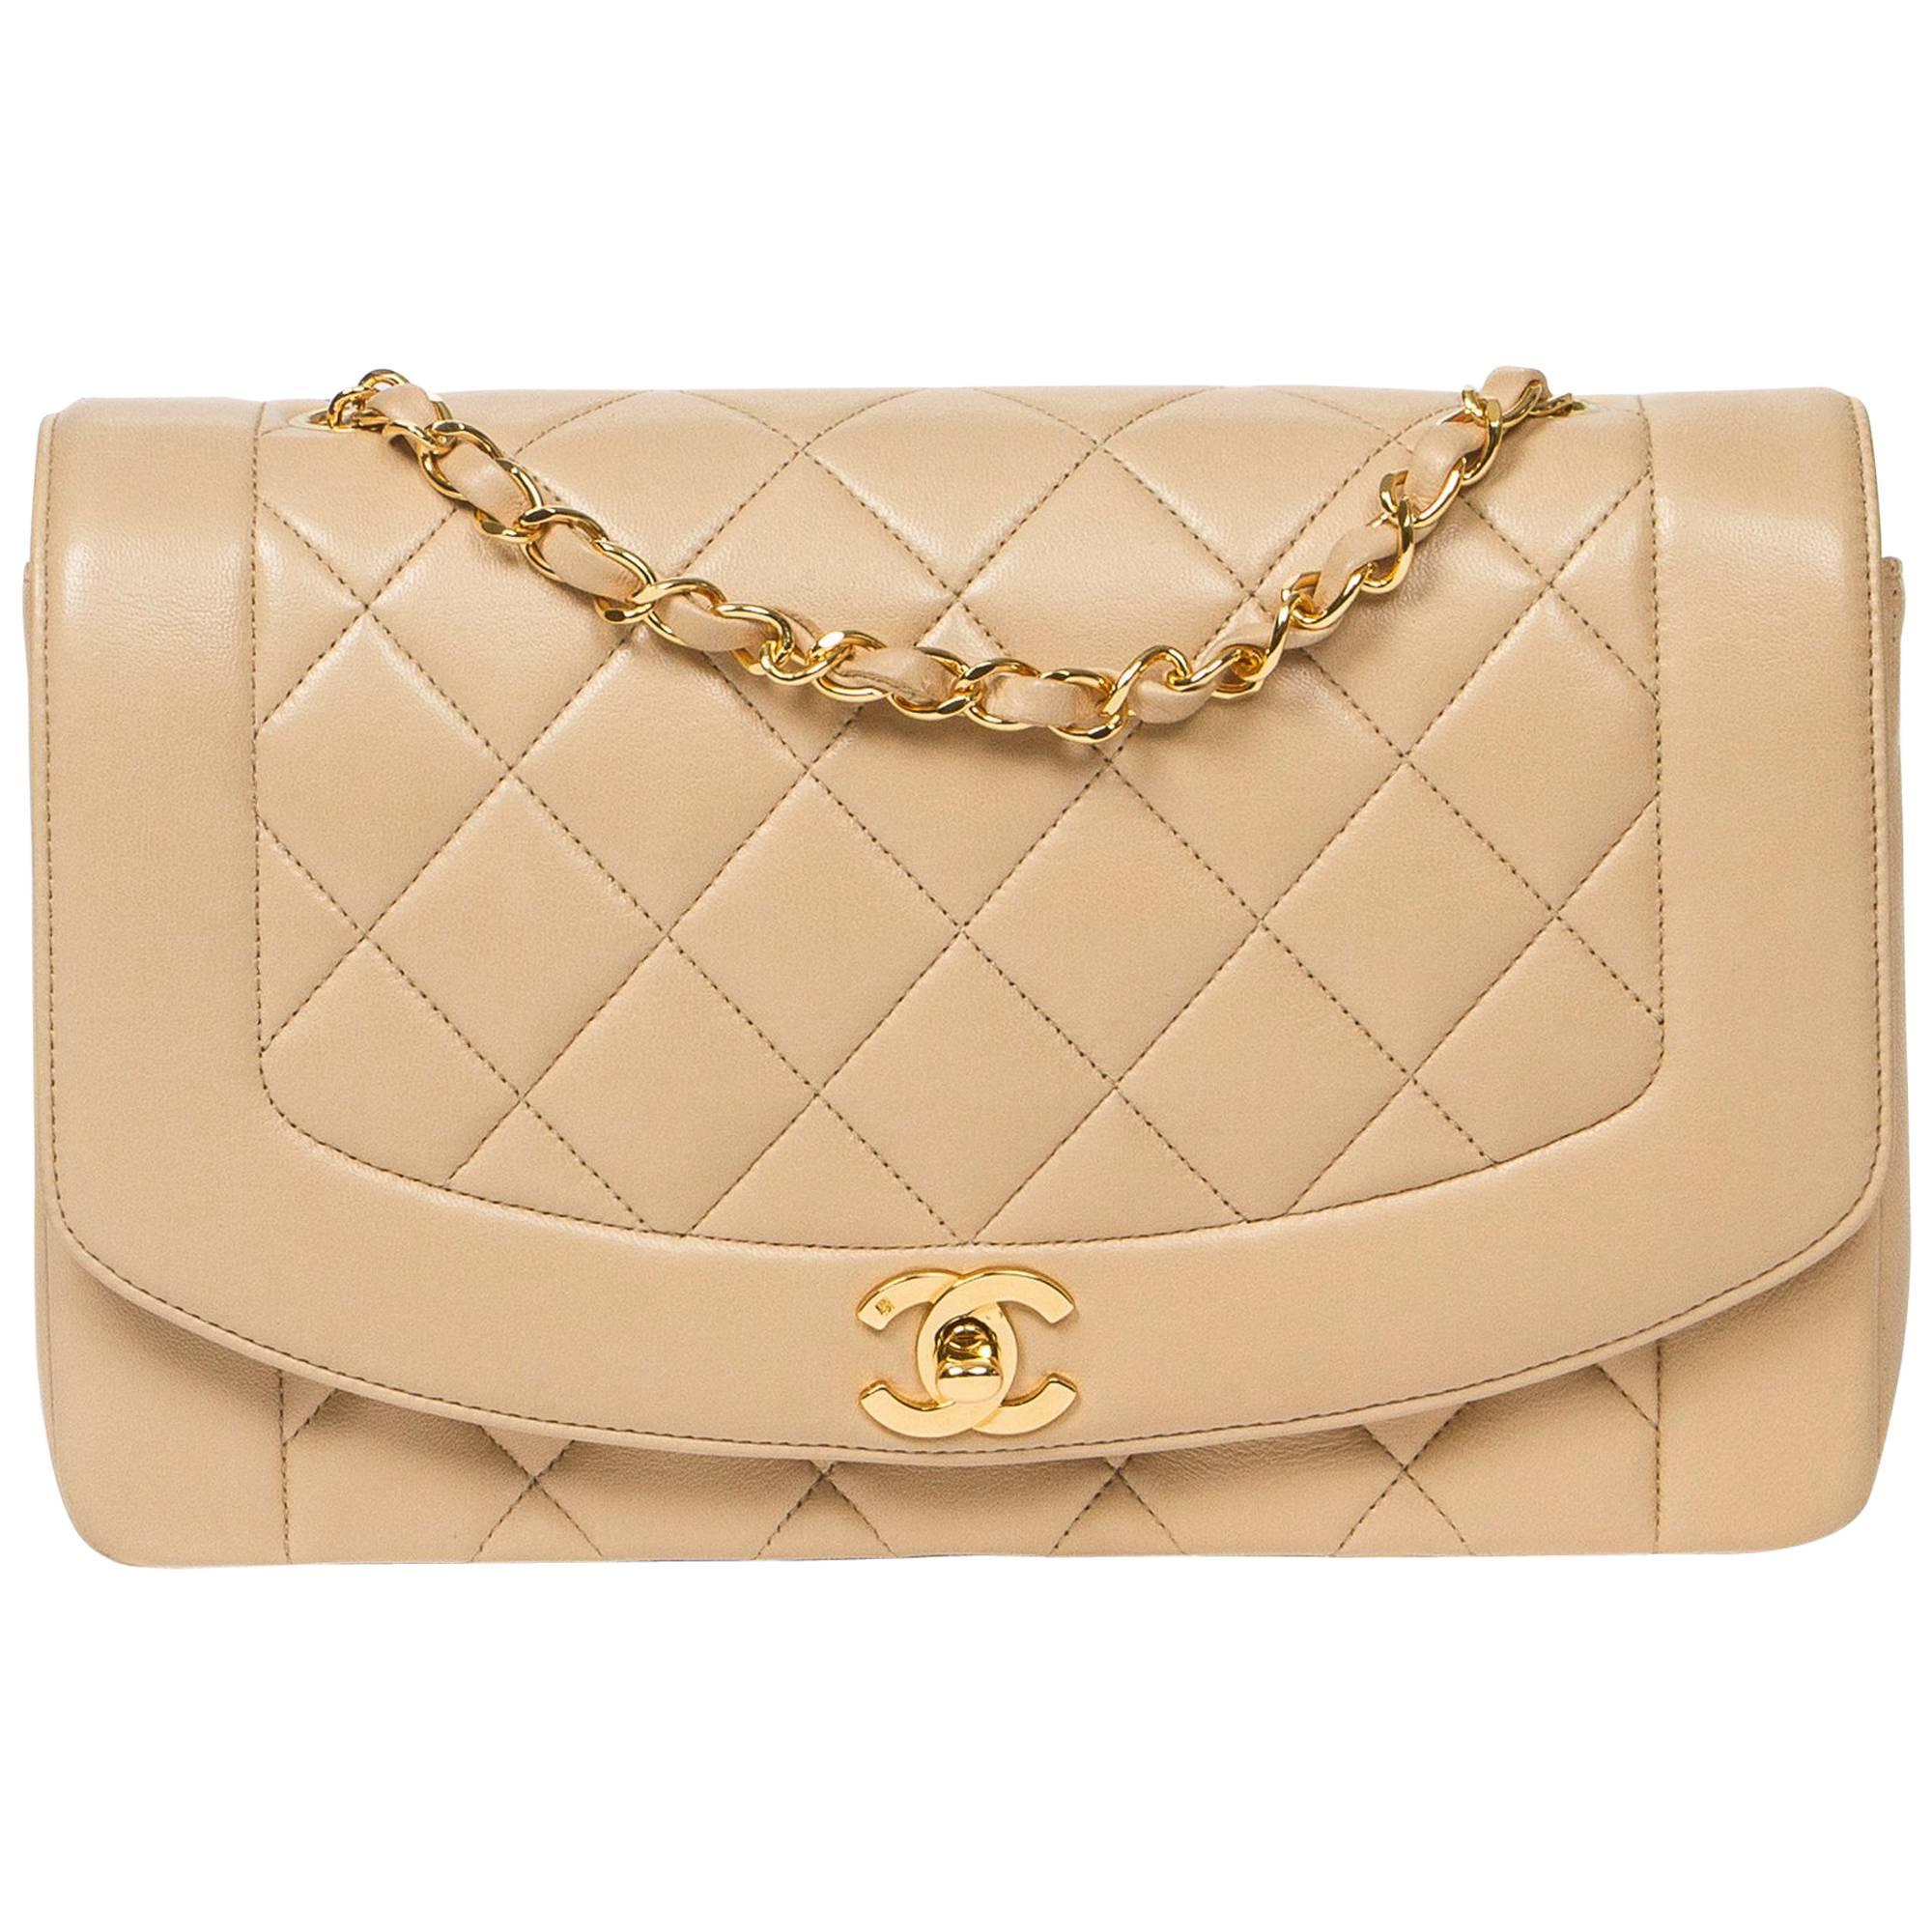 Chanel Mademoiselle Flap in beige quilted calf leather